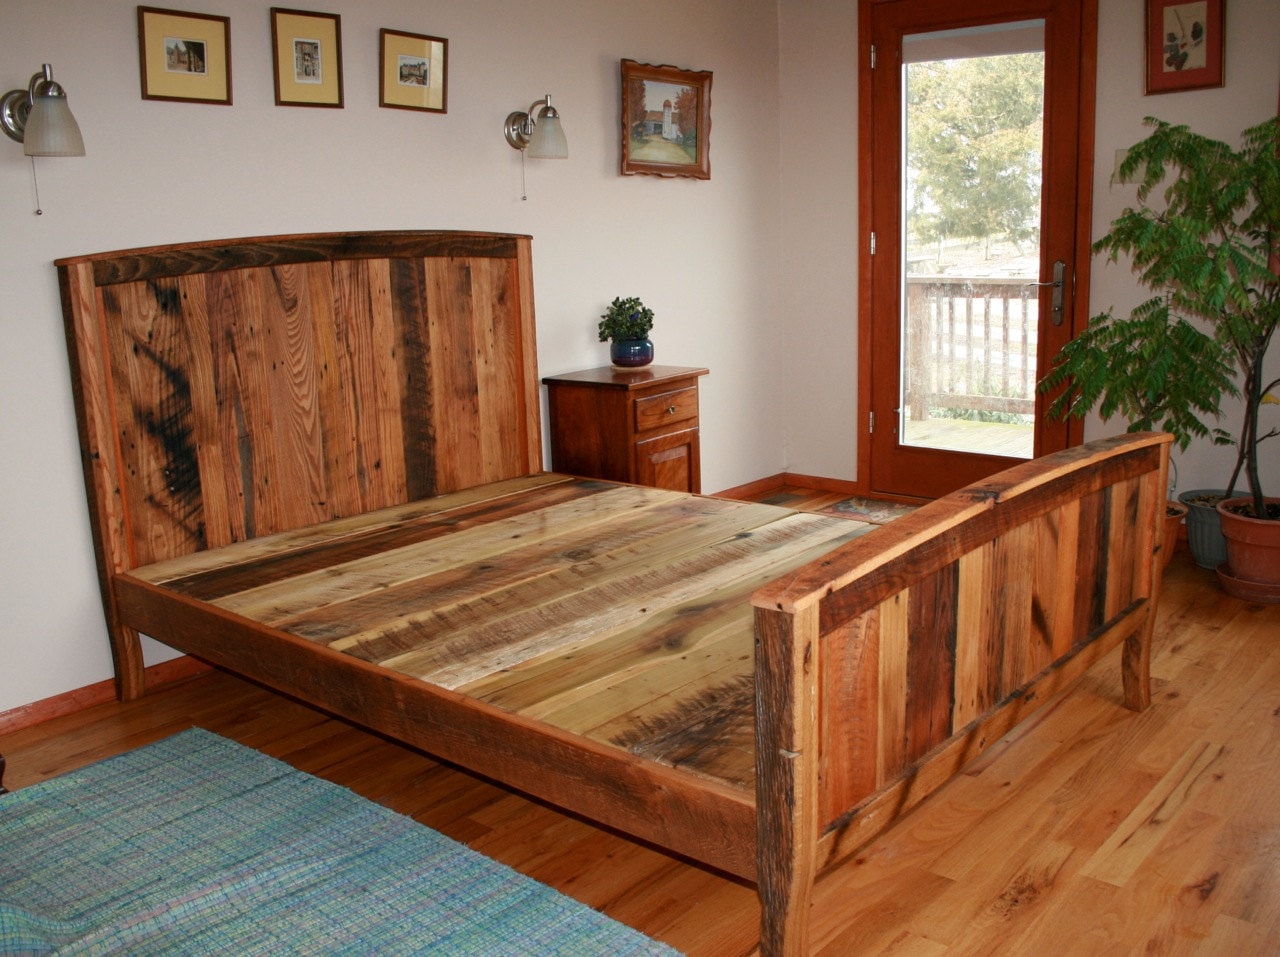 Cozy Country Bedframe from Wormy Chestnut and Reclaimed Oak